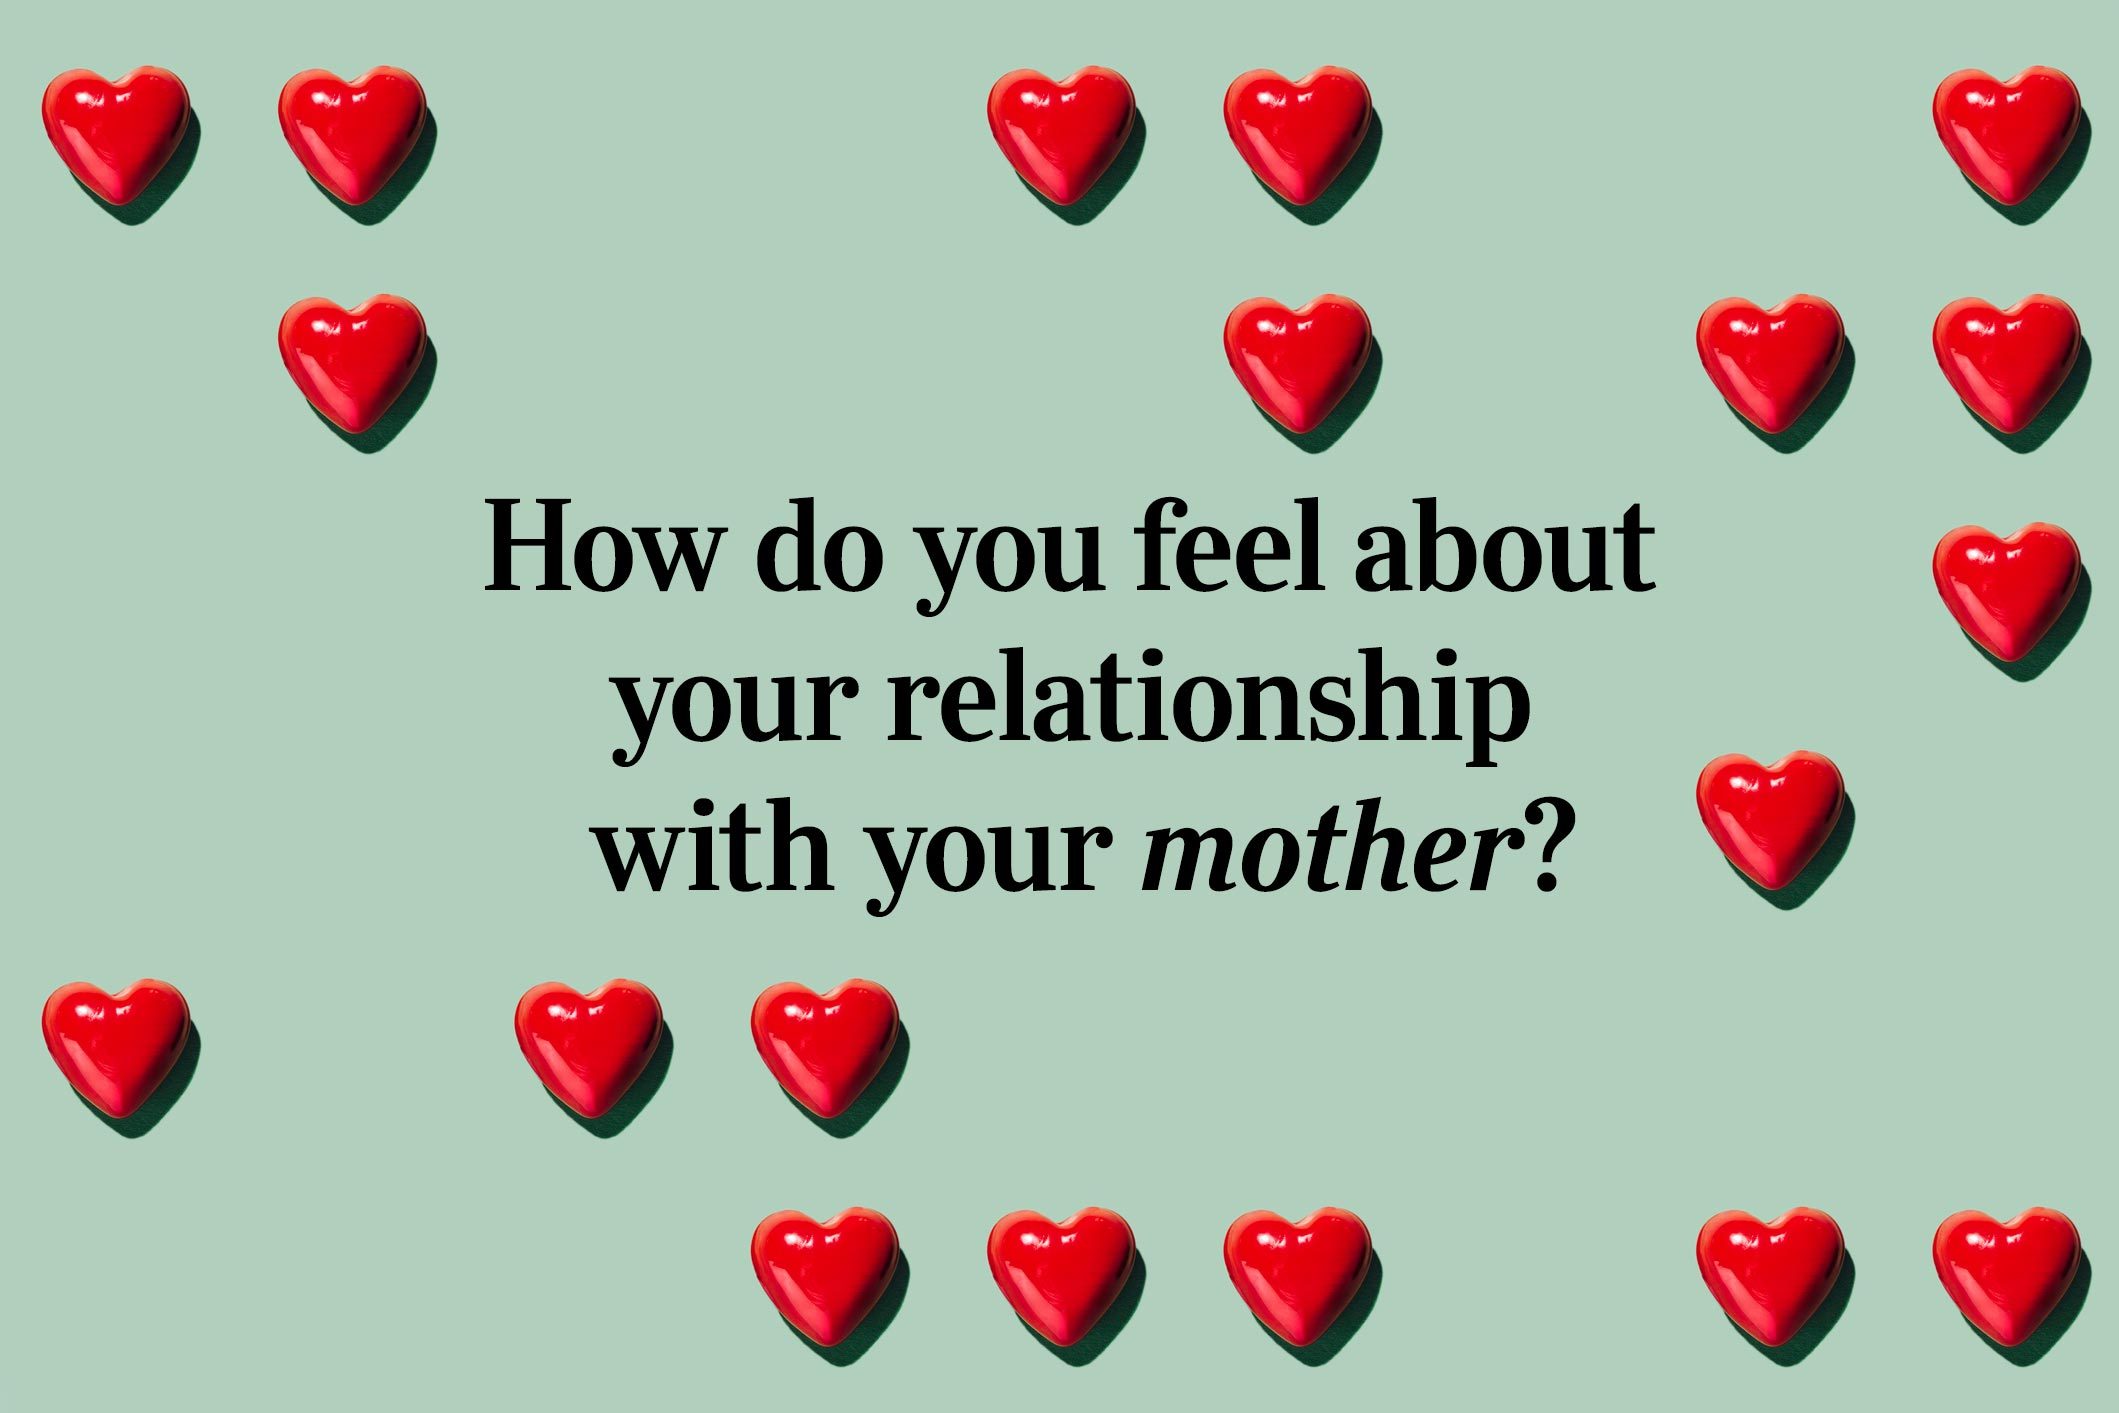 <p>We're deep into the more intimate questions that lead to love now! How do you feel about your relationship with your <a href="https://www.rd.com/list/quotes-about-mothers/">mother</a>?</p>